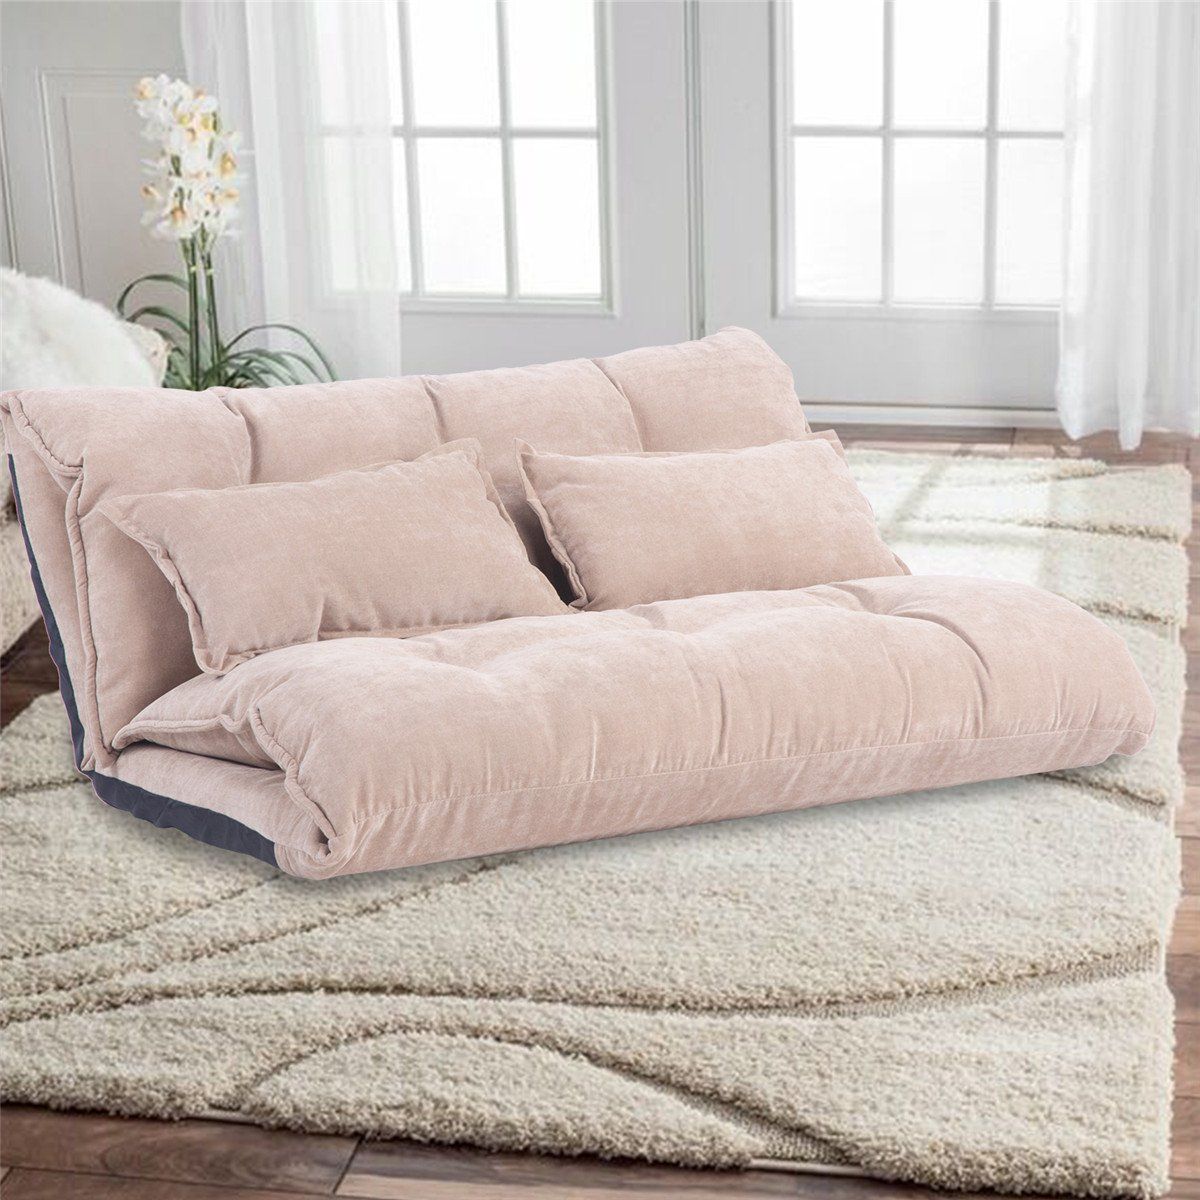 A Multifunctional Foldable Sofa Bed